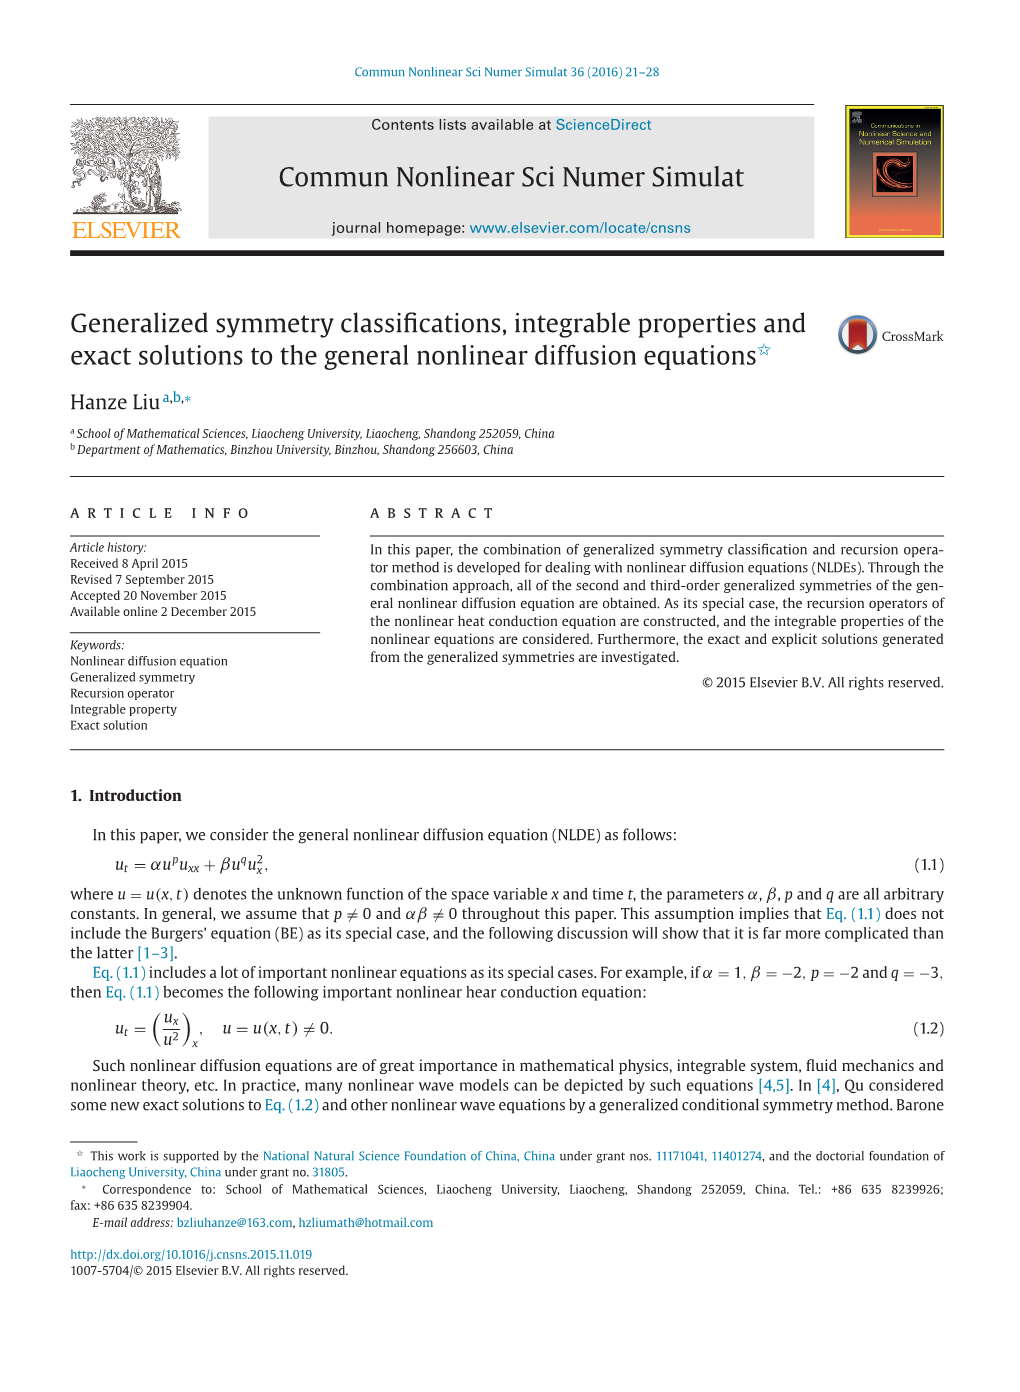 Generalized Symmetry Classifications, Integrable Properties and Exact Solutions to the General Nonlinear Diffusion Equations